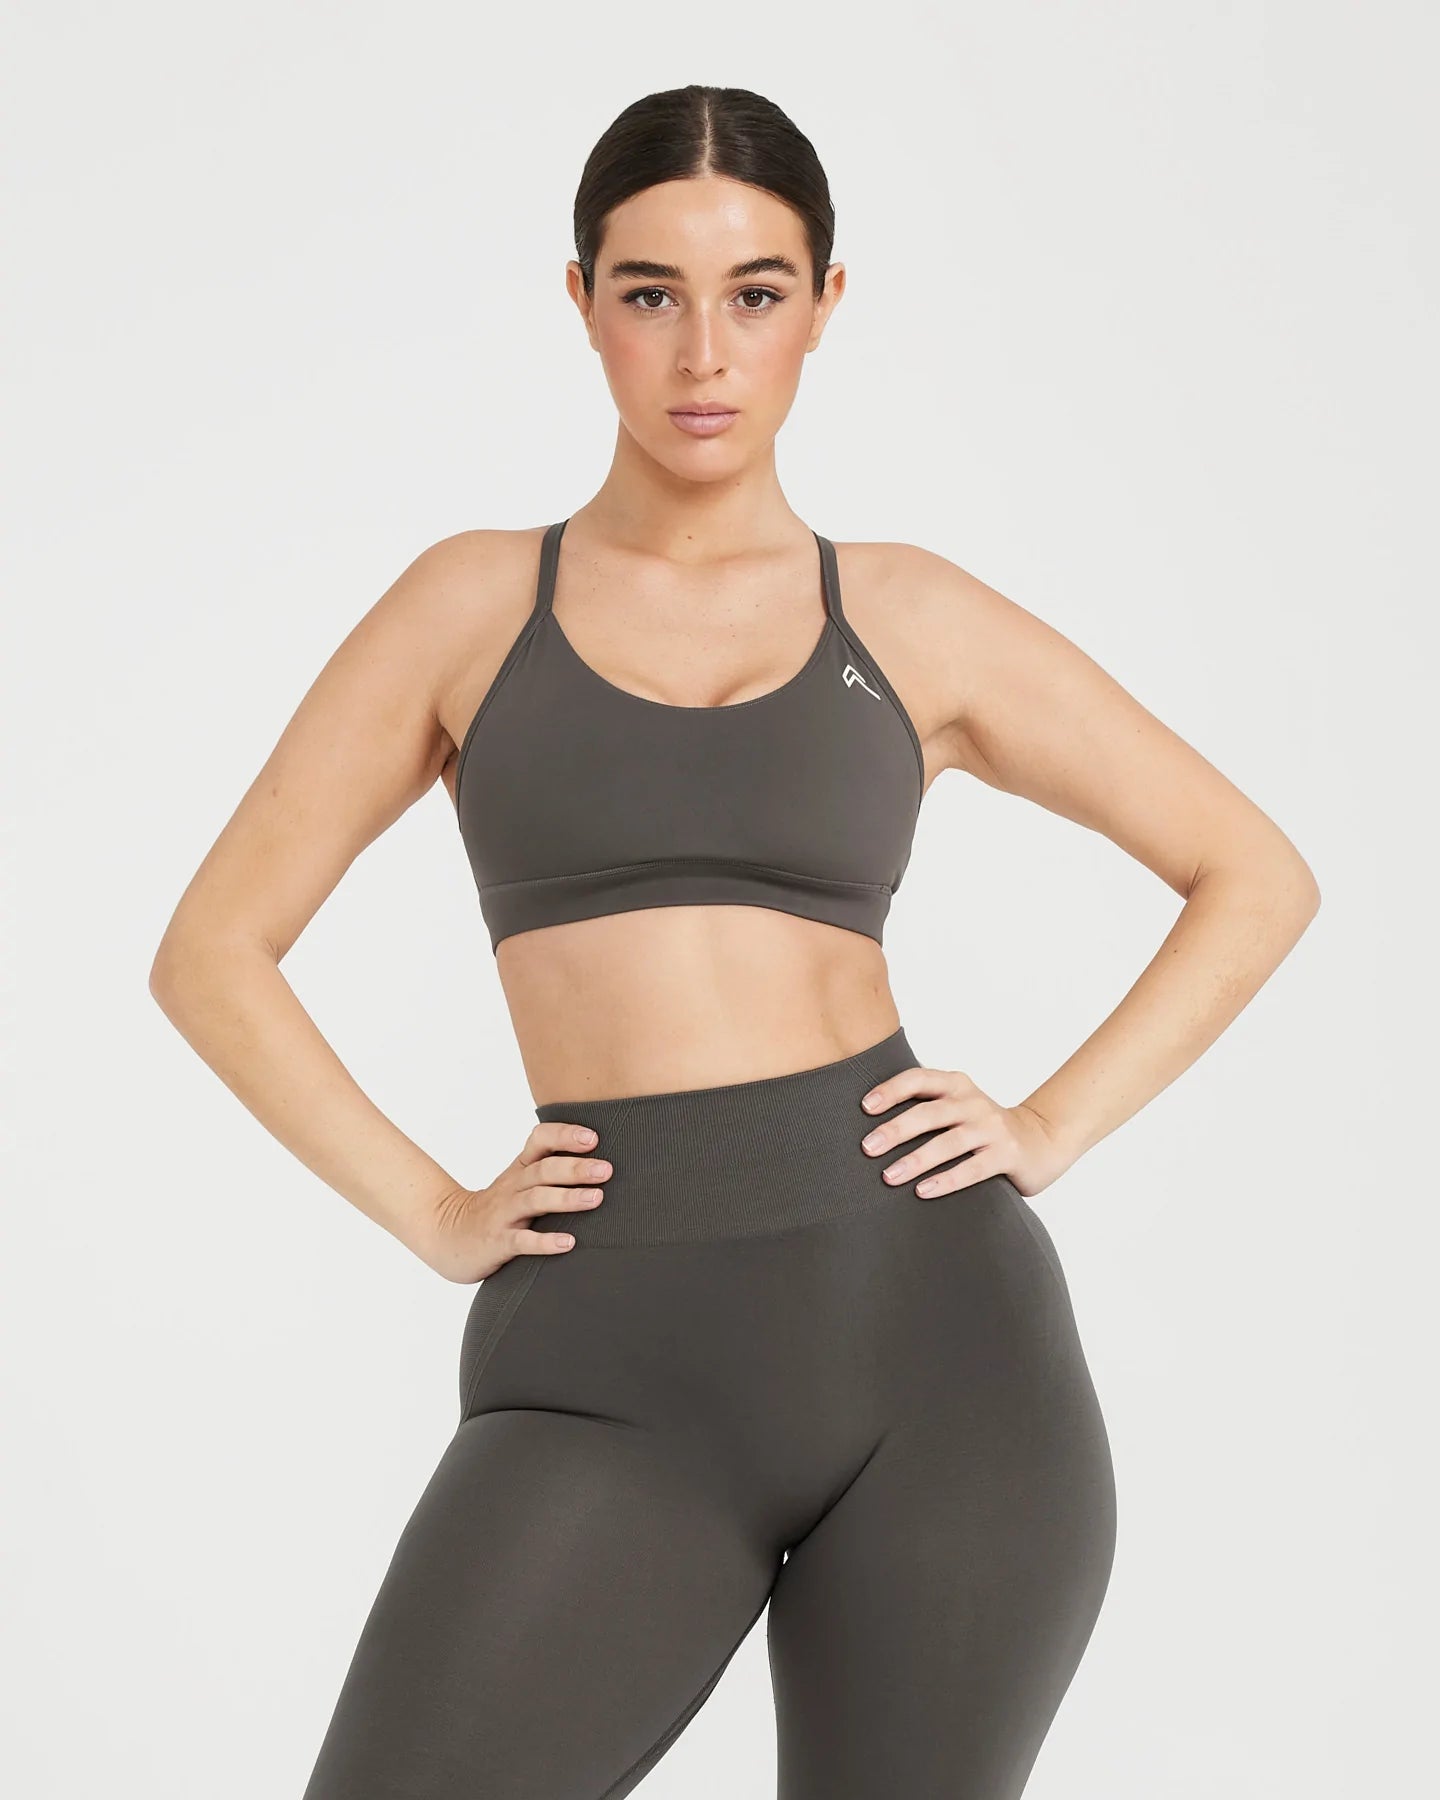 oner active new everyday sports bras + effortless collection restock